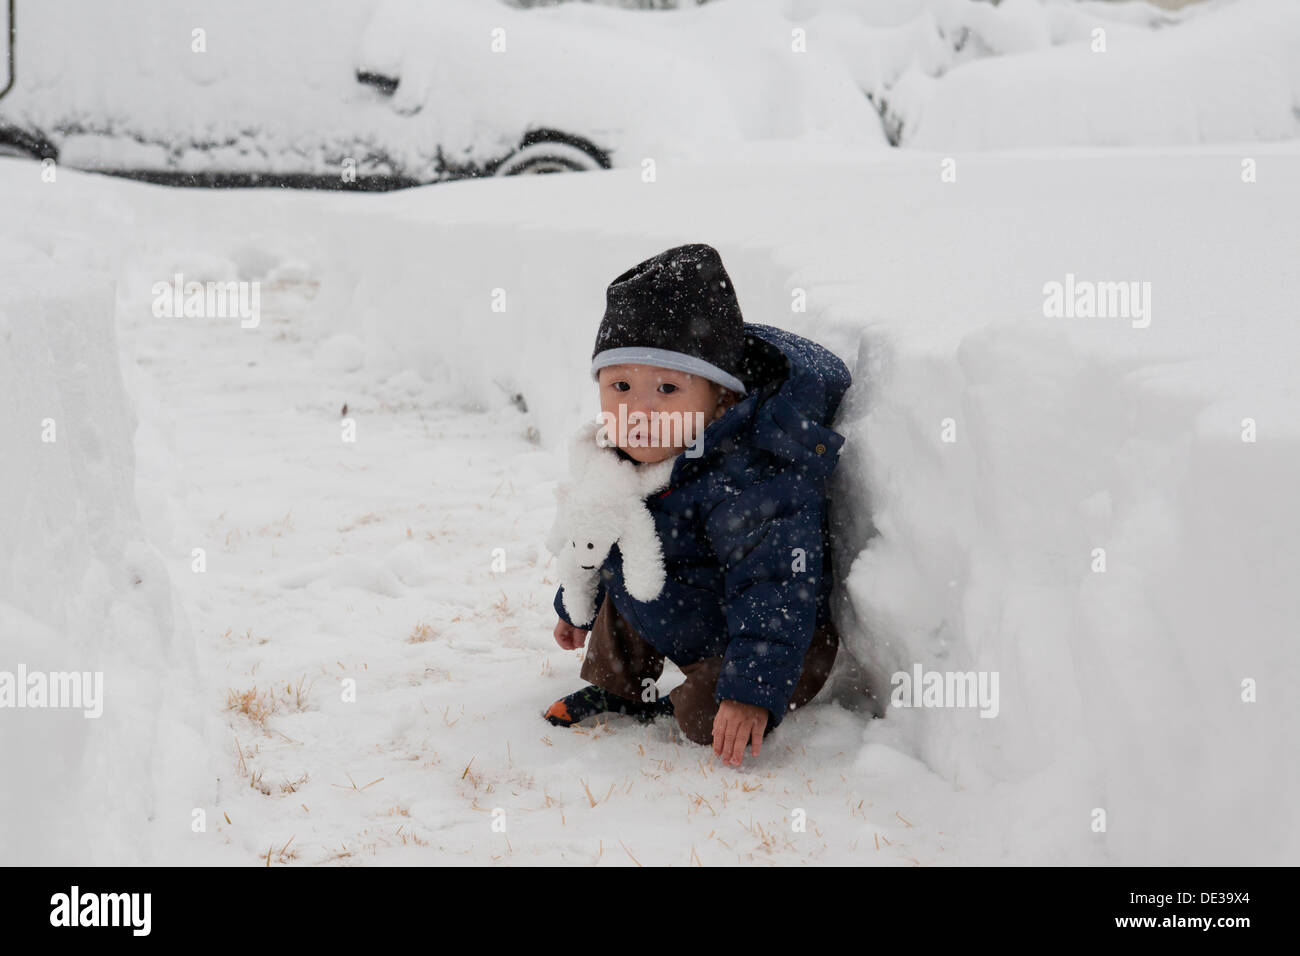 Asian baby boy sitting on snow Banque D'Images